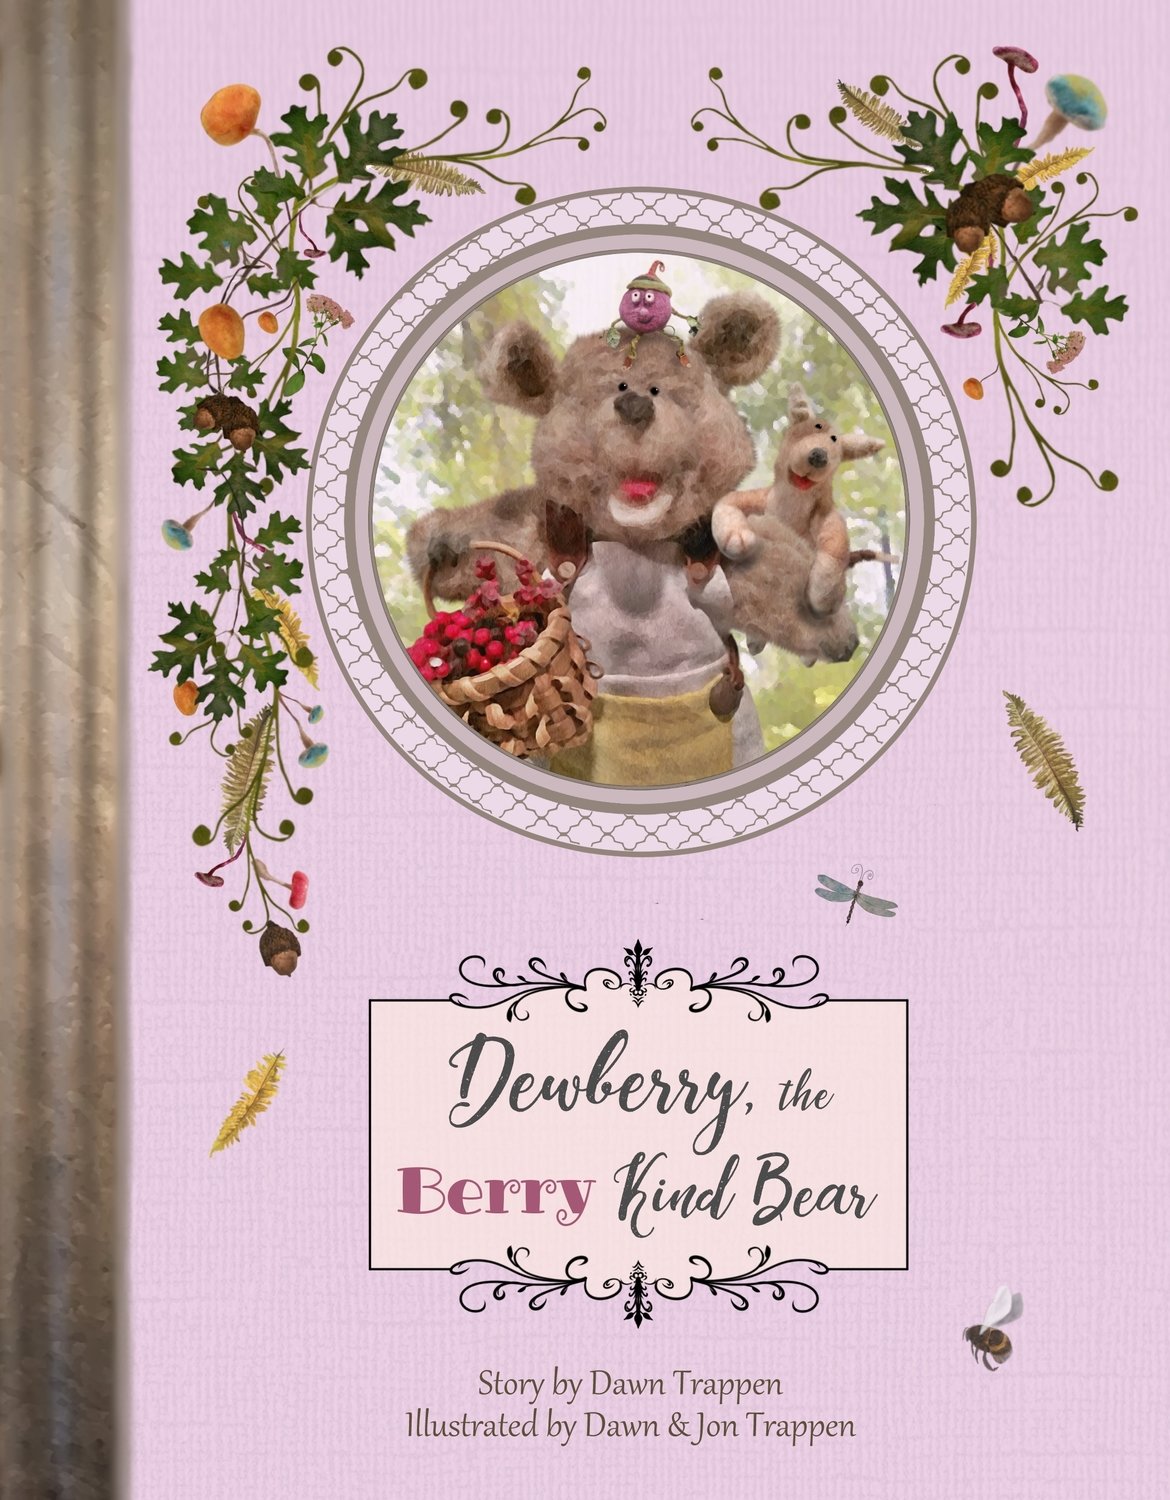 Dewberry, the Berry Kind Bear (Book 2)